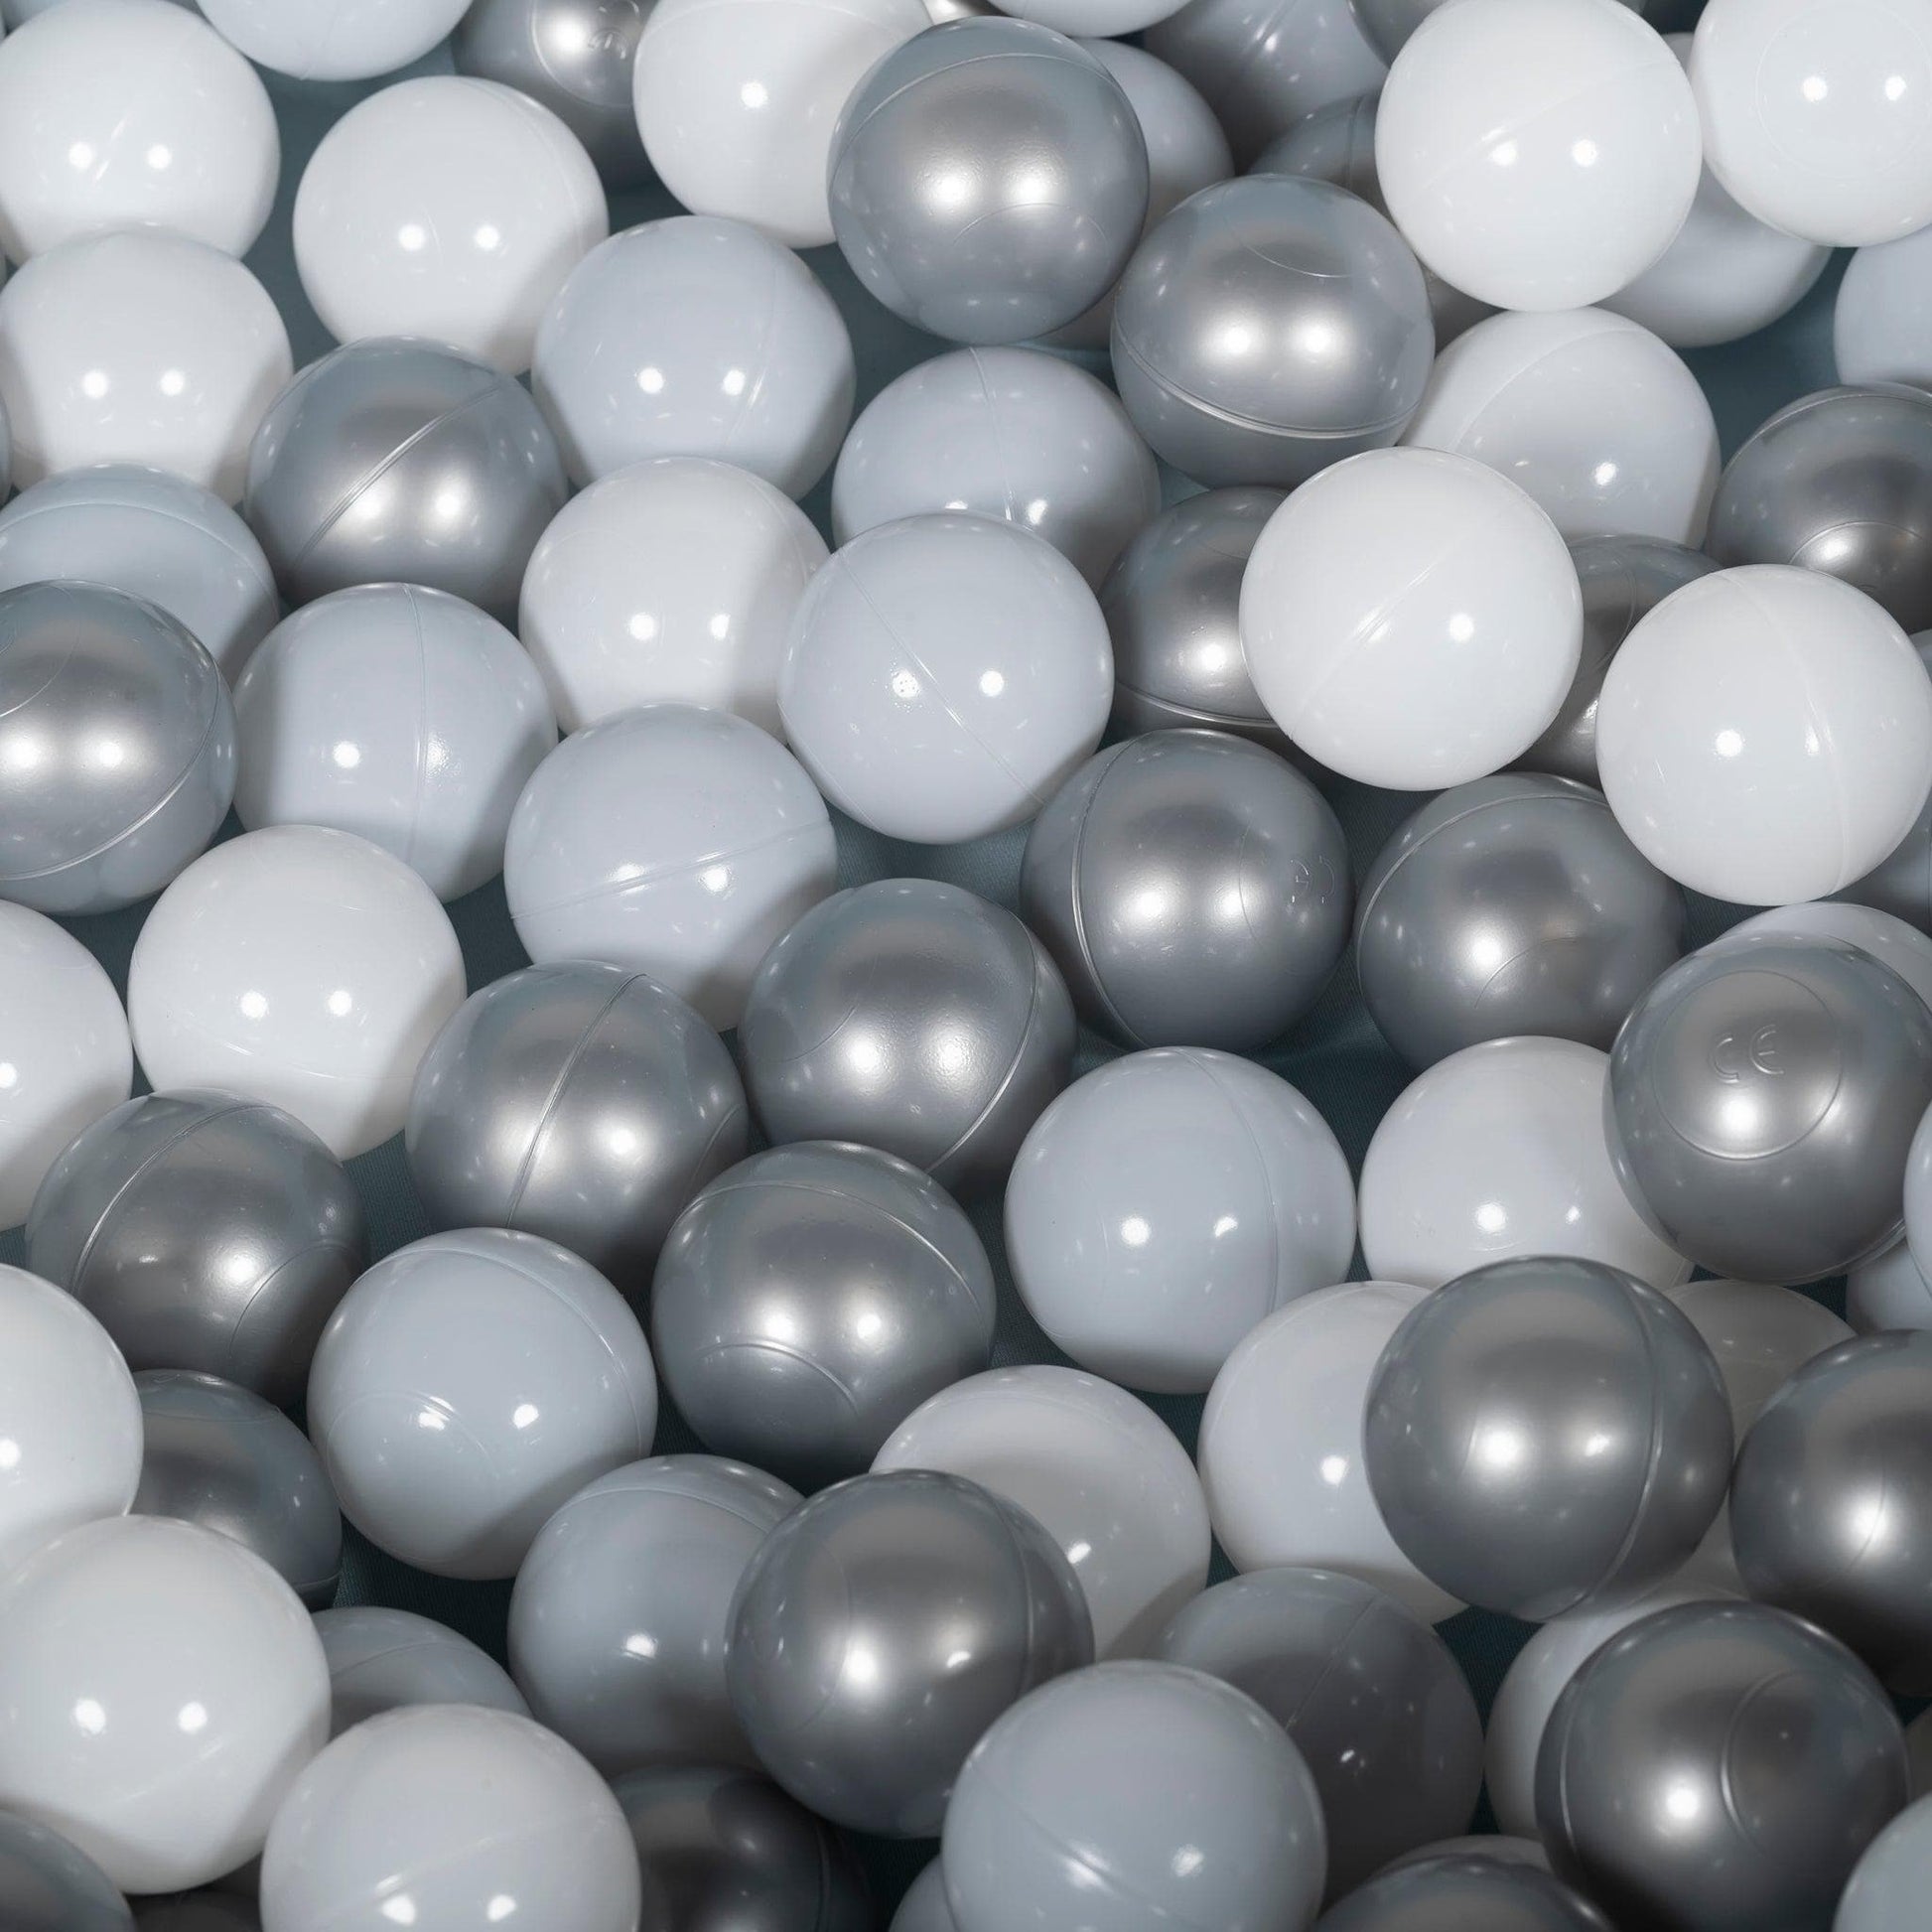 Ball Pit Balls - Grey & White-Babies and Toddlers-My Happy Helpers